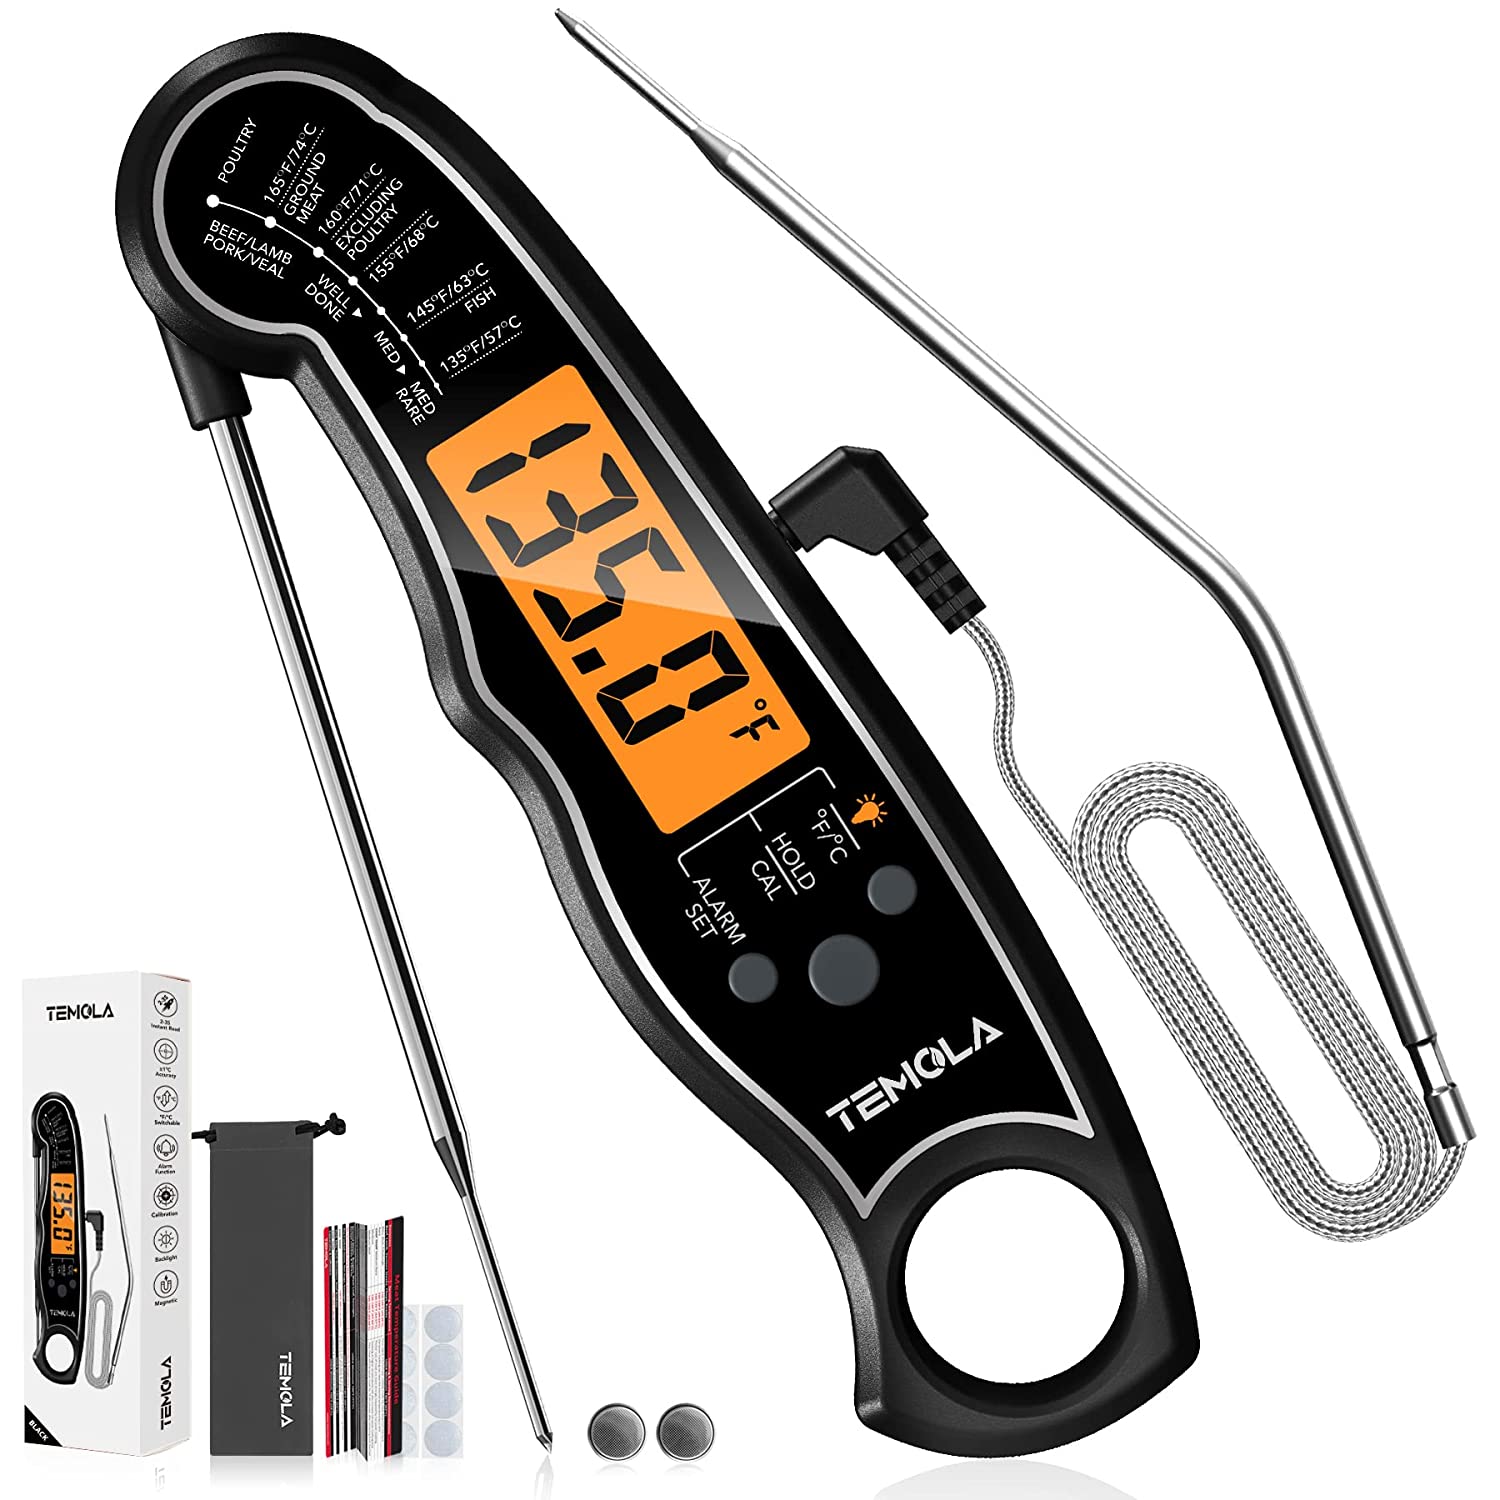 TEMOLA Meat Thermometer, Instant Read Food Thermometer [...]